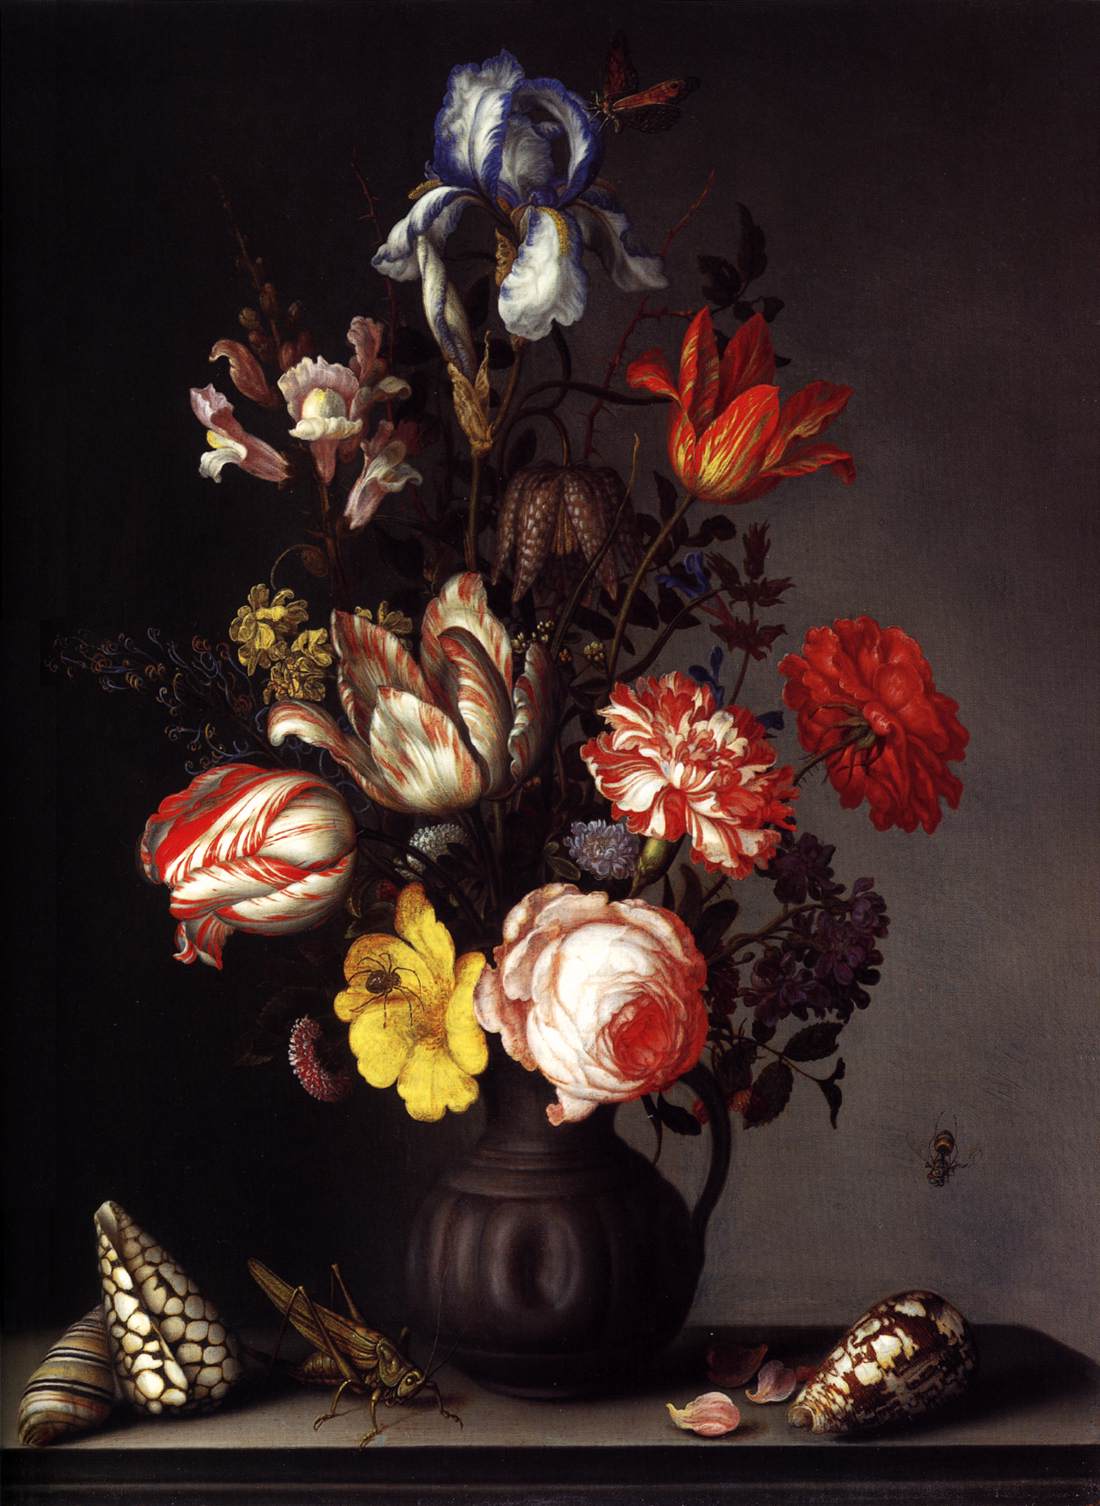 Flowers in a Vase with Shells and Insects